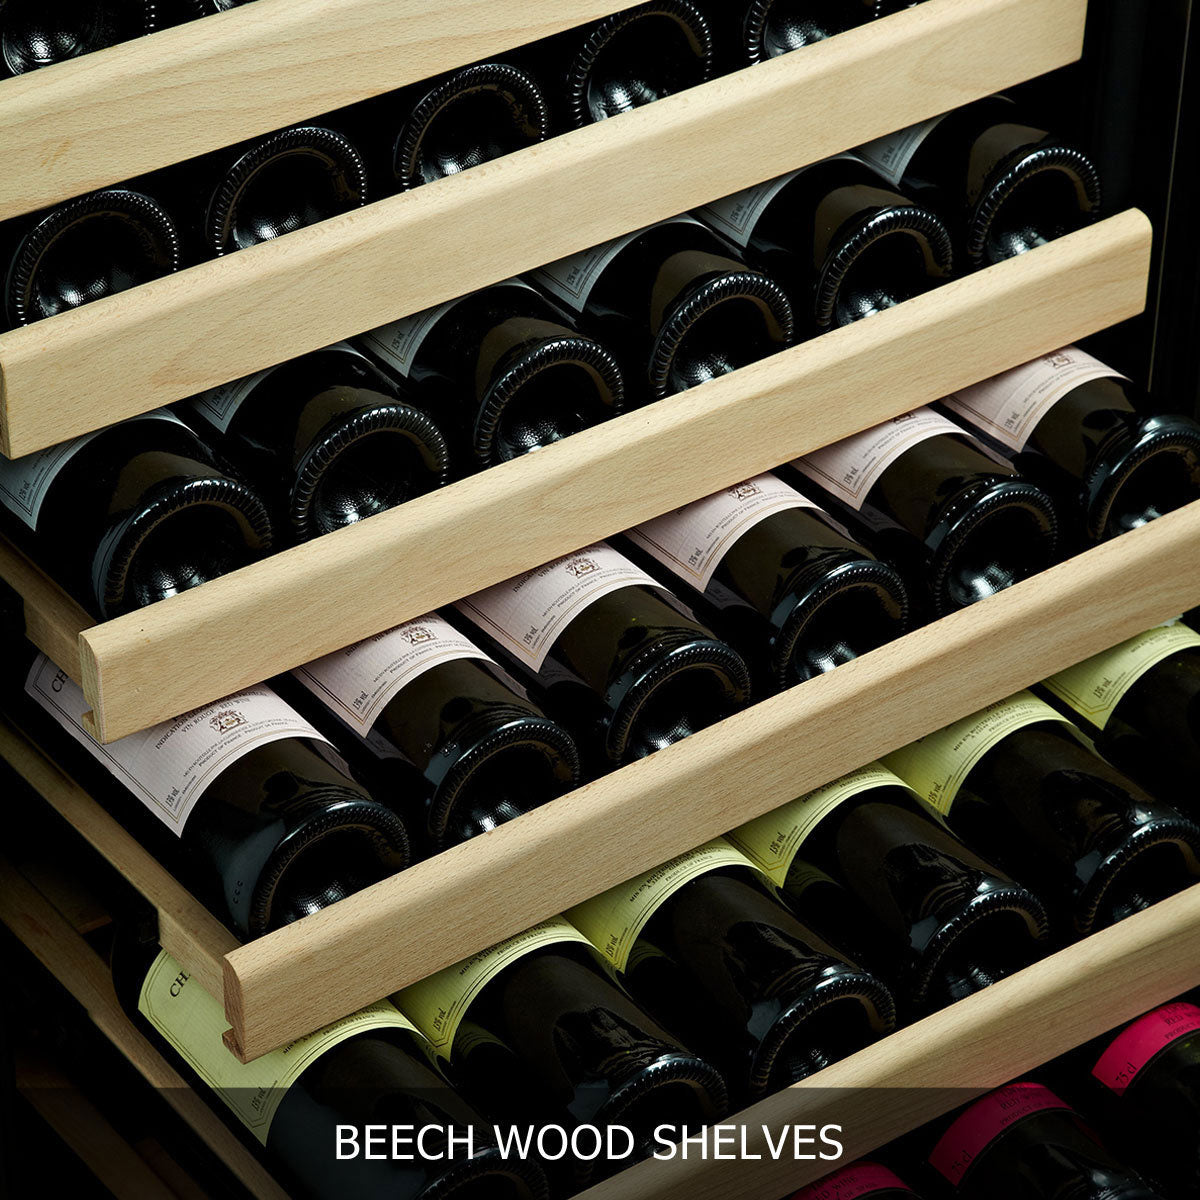 A sleek, single-zone wine cooler fridge with a capacity of 166 bottles. Perfect for any kitchen, bar, or wine room.